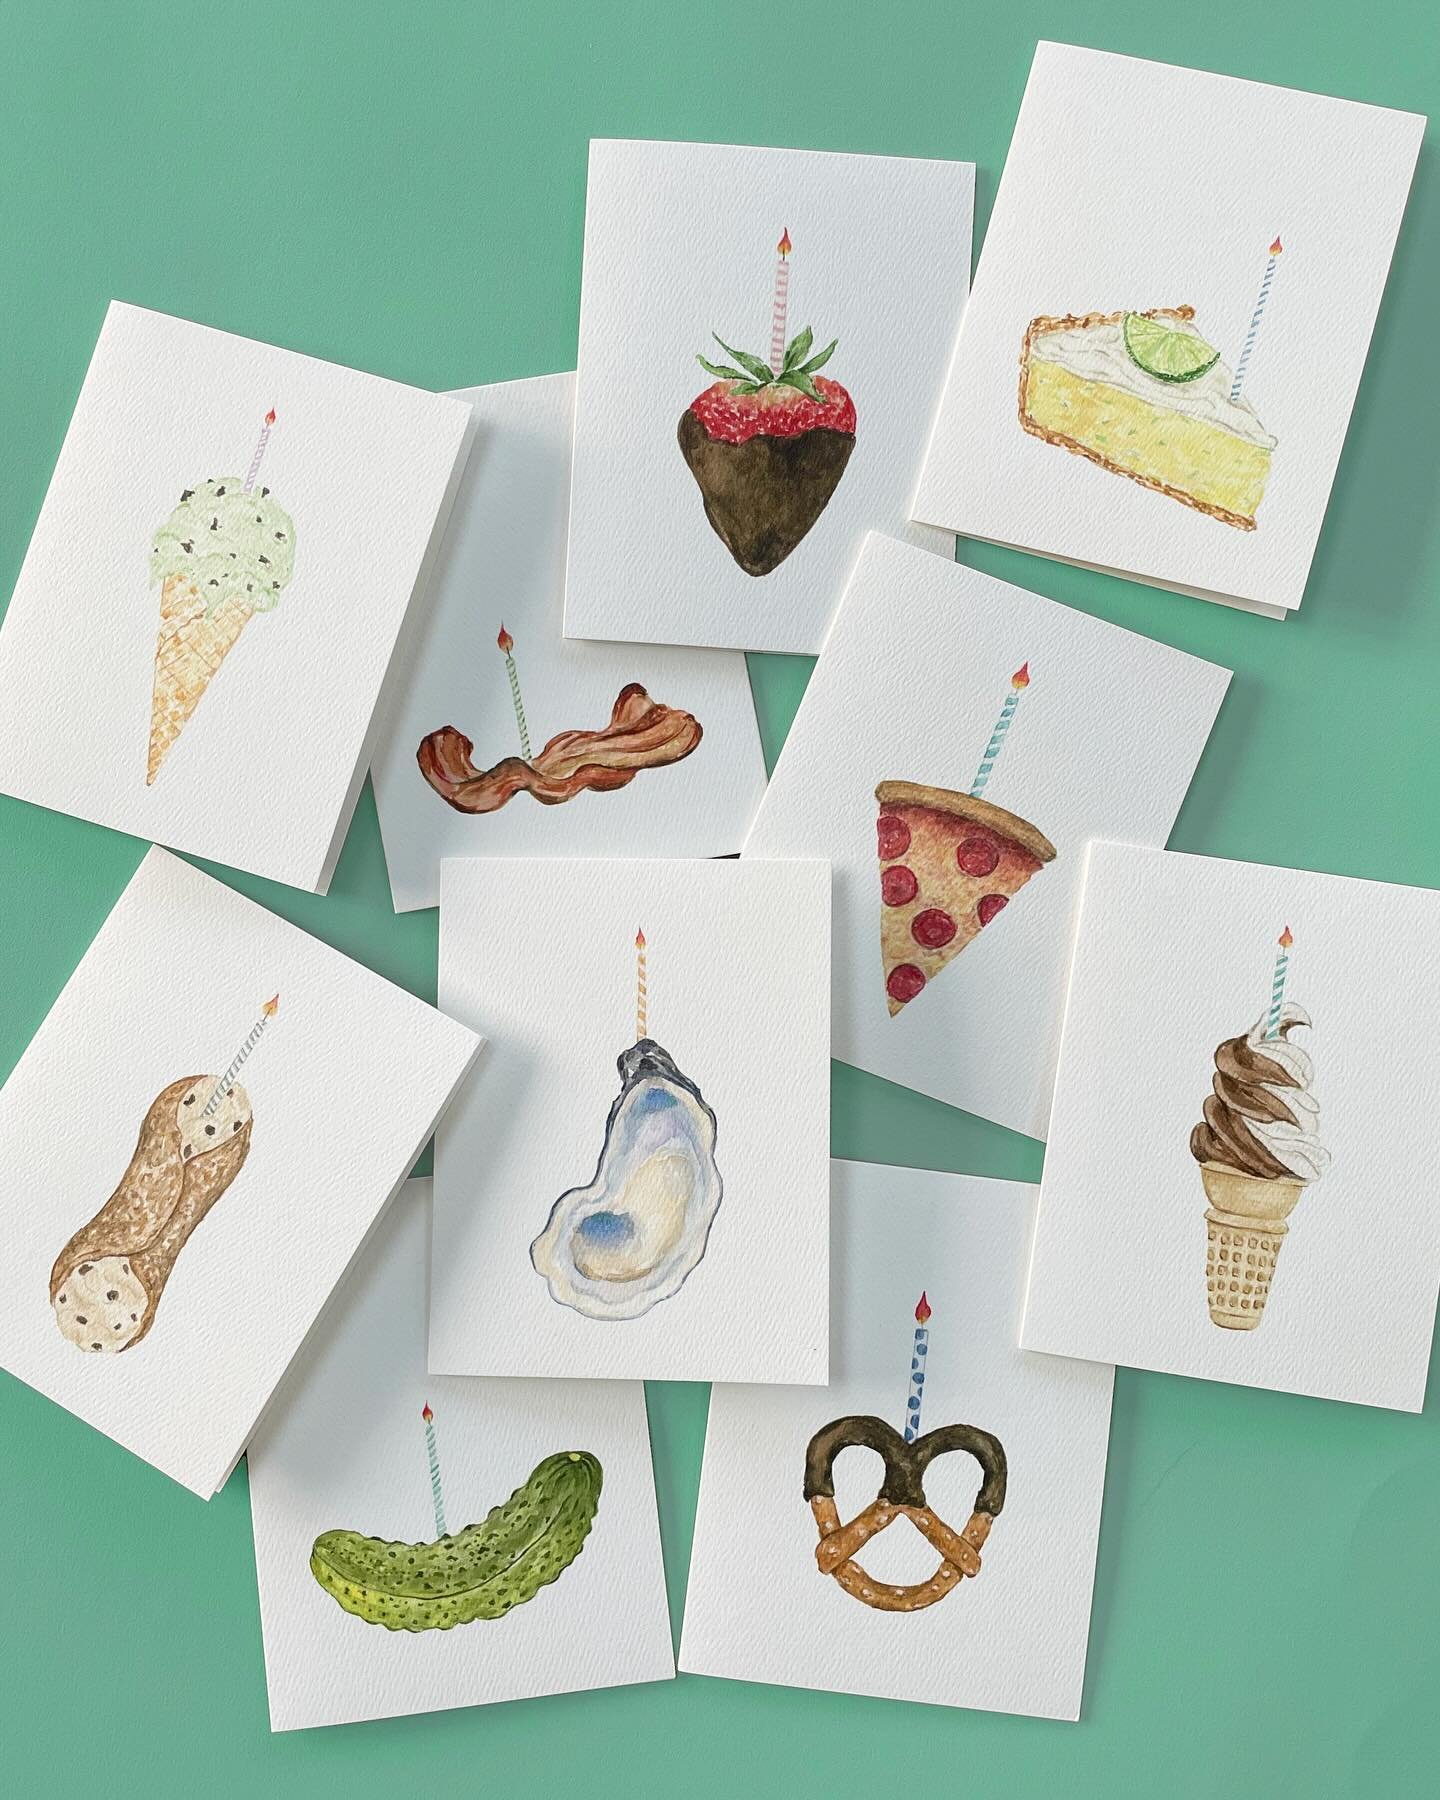 Coming soon ~ over the past 7 years, I&rsquo;ve hand painted my loved one&rsquo;s favorite food, or indulgence if you will, and it&rsquo;s been a little dream of mine to create them into greeting cards! Launching so soon, sign up for my newsletter in